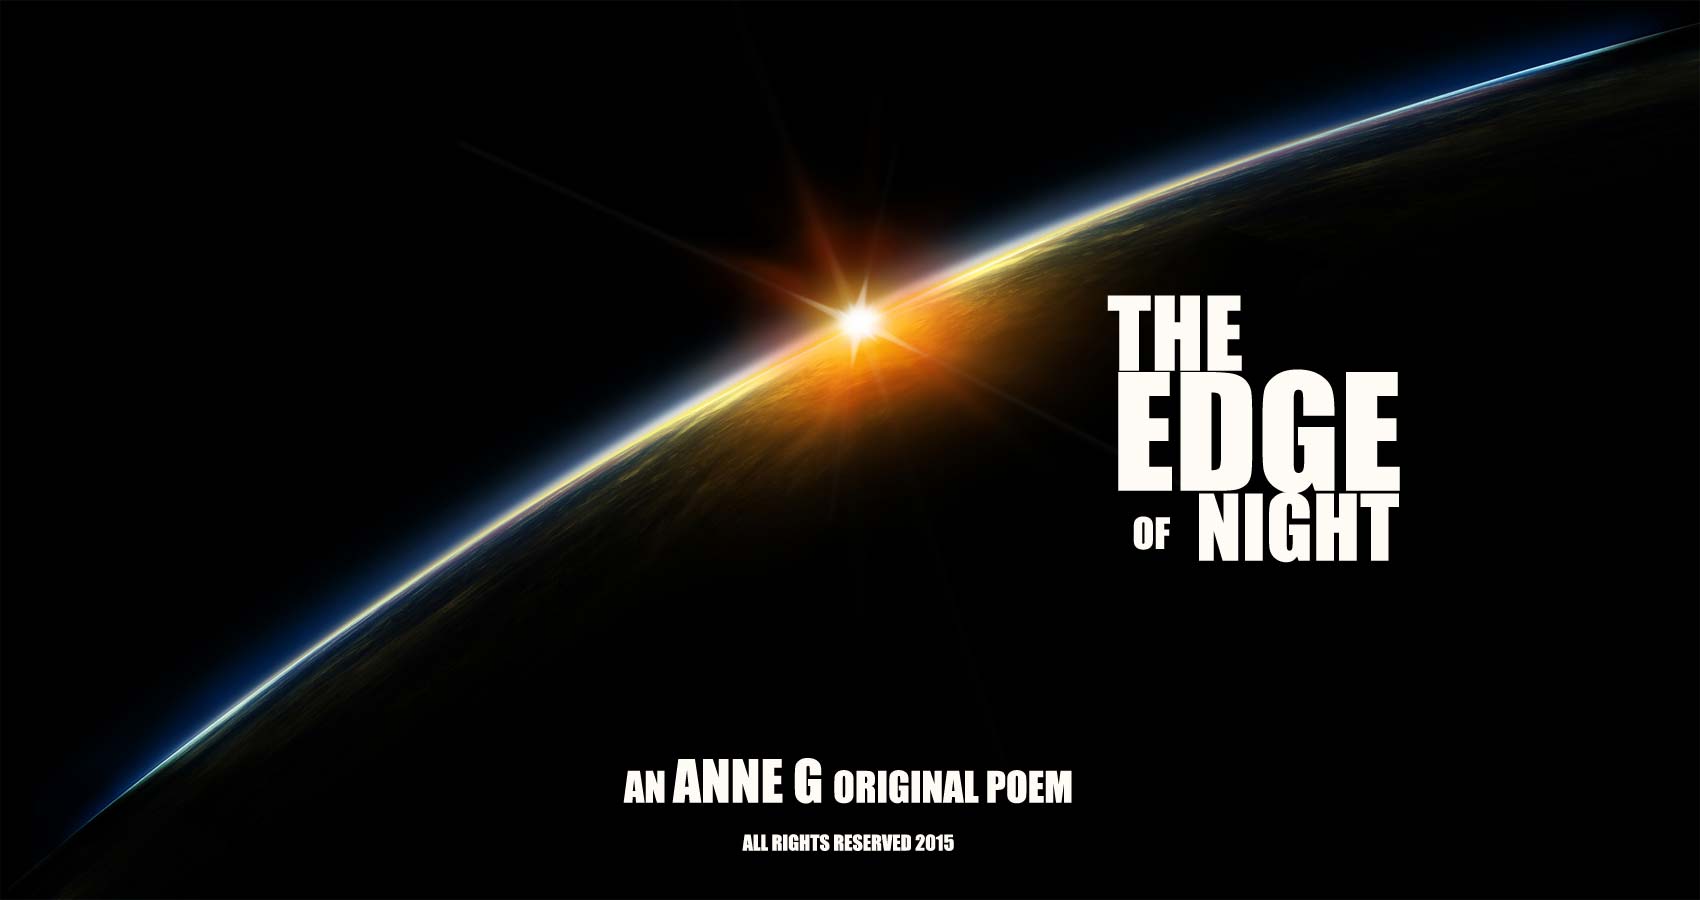 spillwords.com The Edge Of Night by Anne G